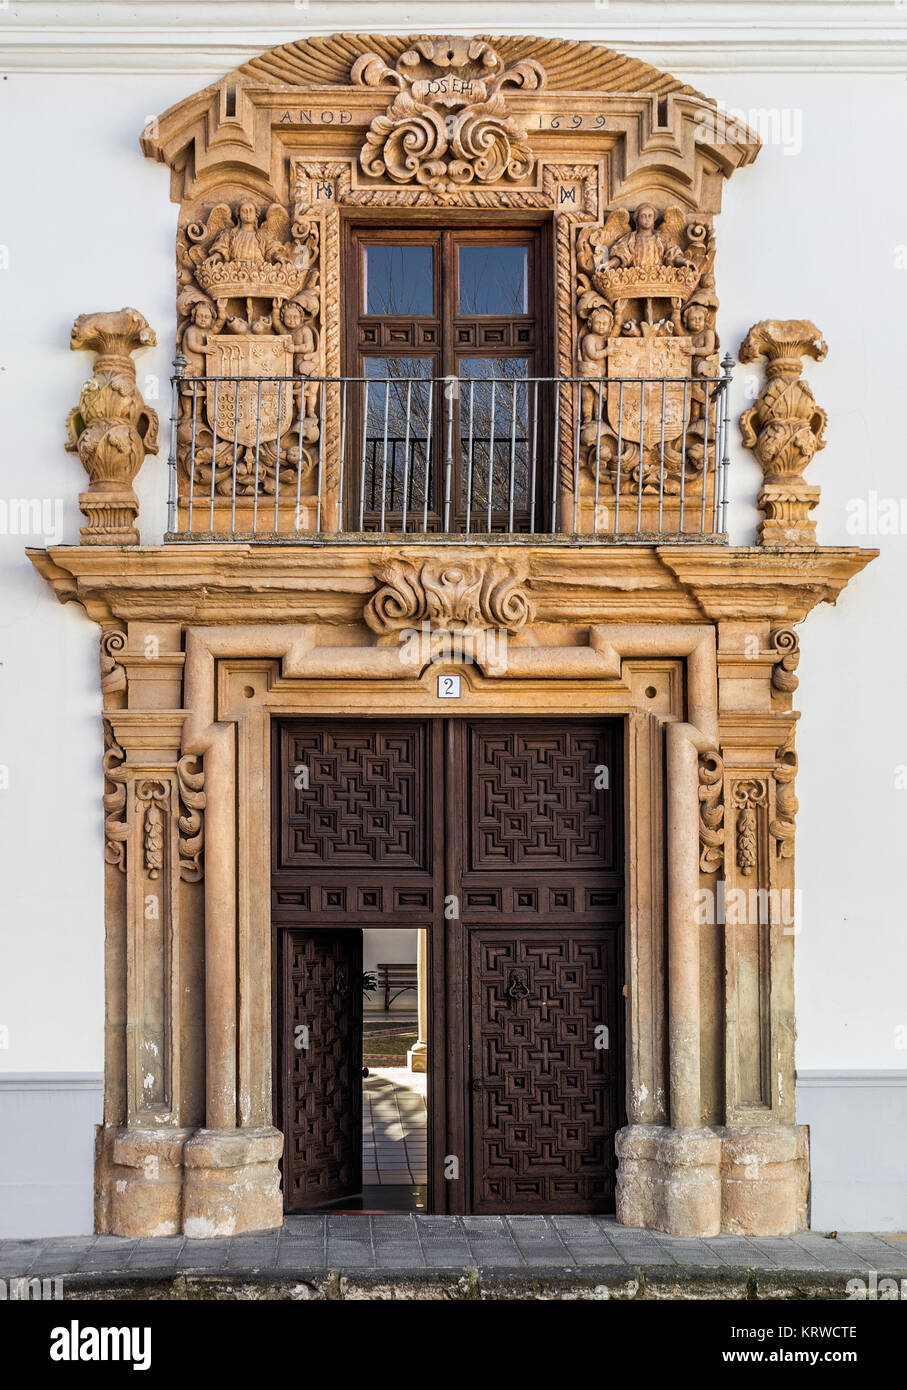 Door and facade of 1699, located in the historic town of Almagro. Spain. Stock Photo